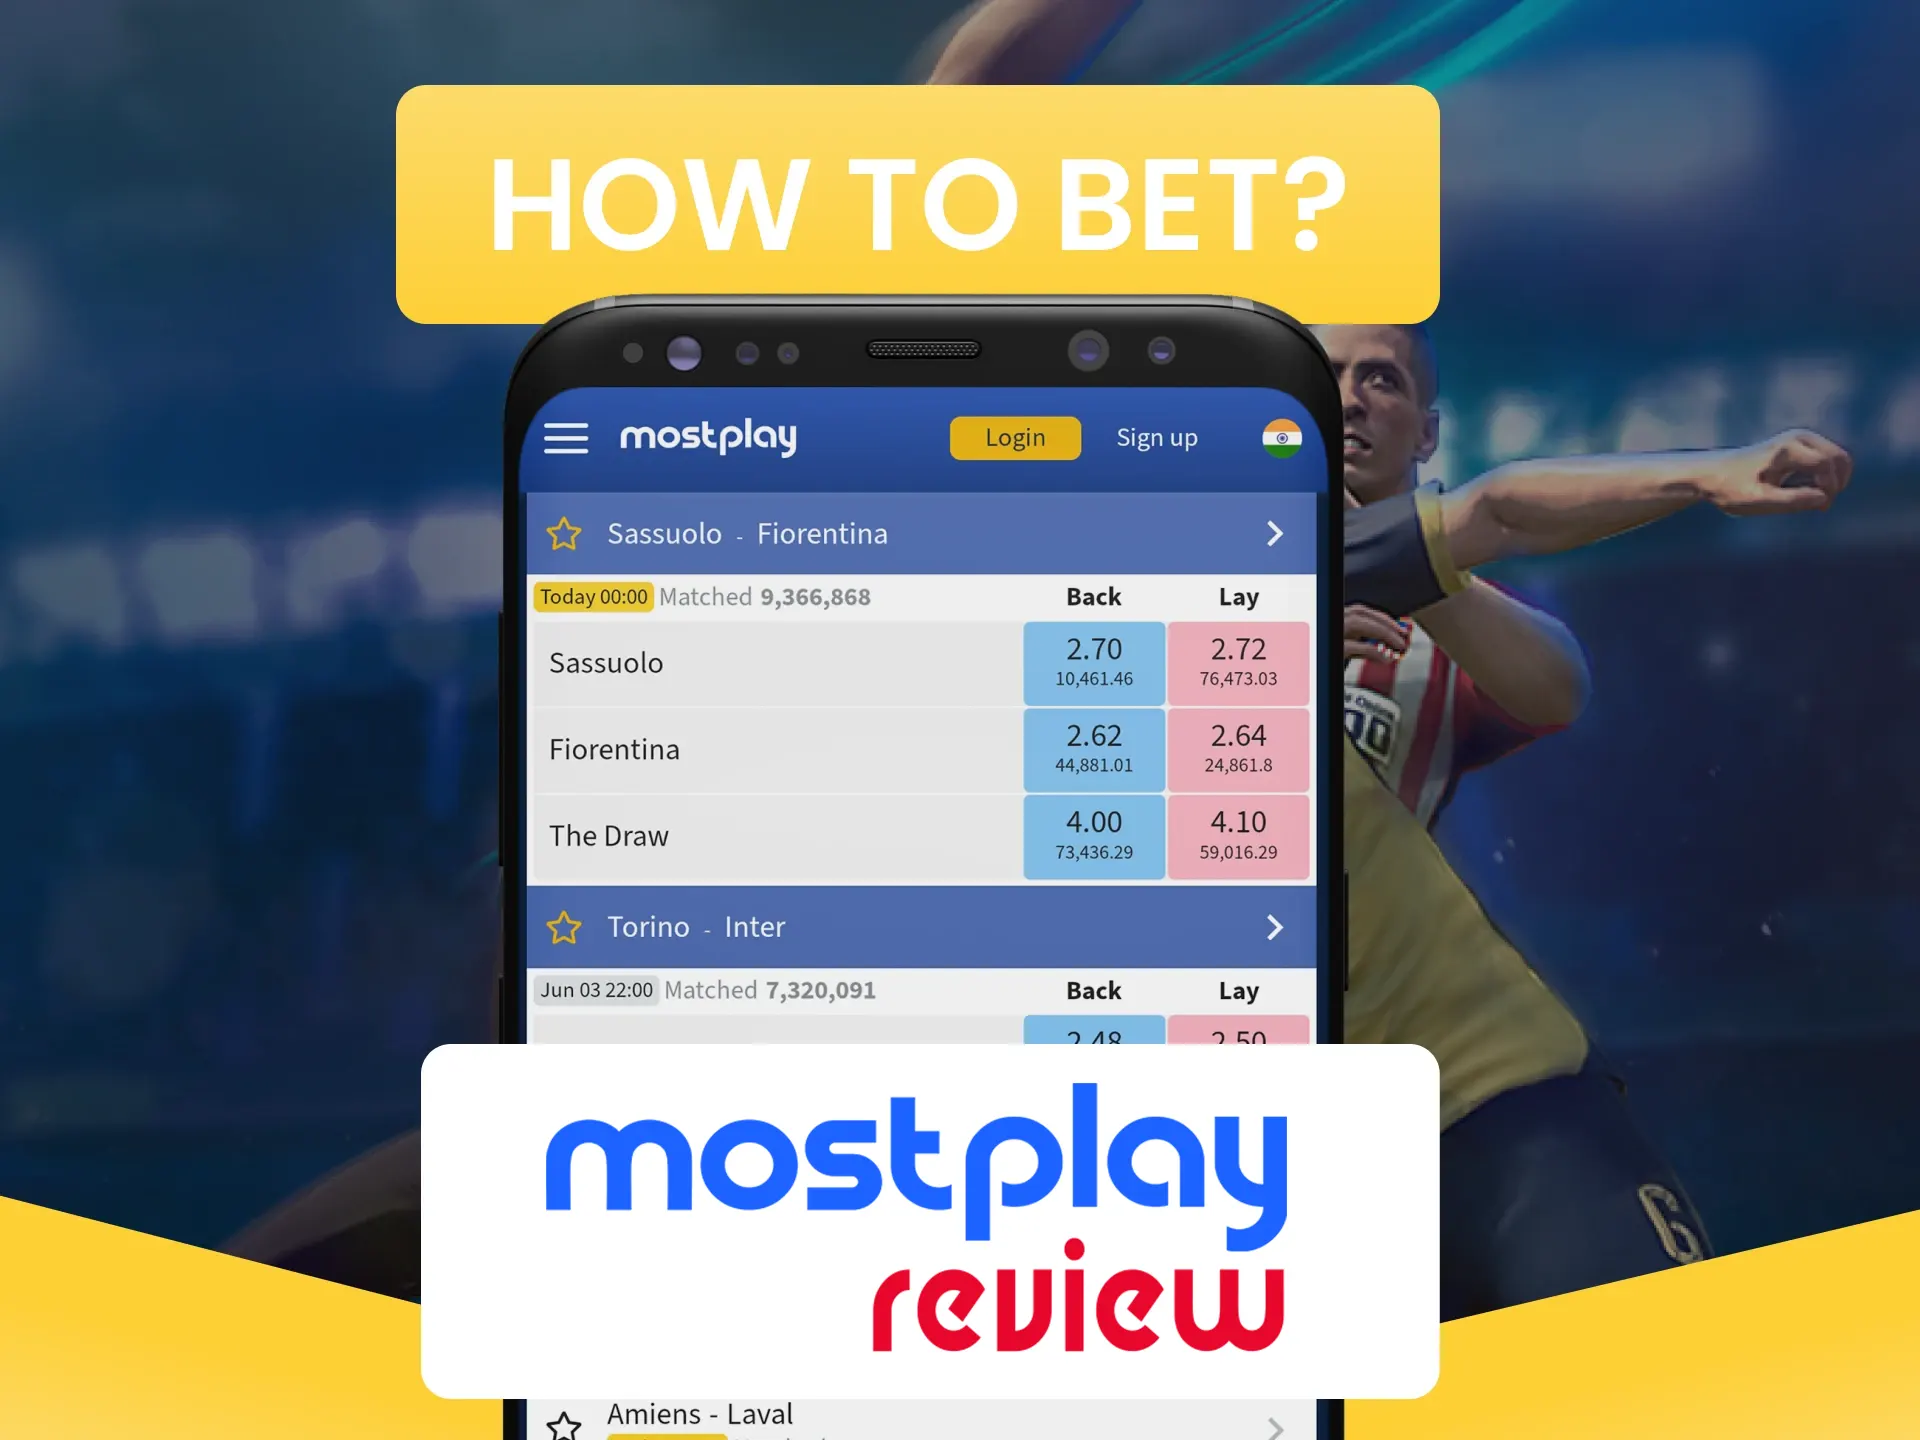 We will tell you how to bet in the Fantasy Sport section of Mostplay.